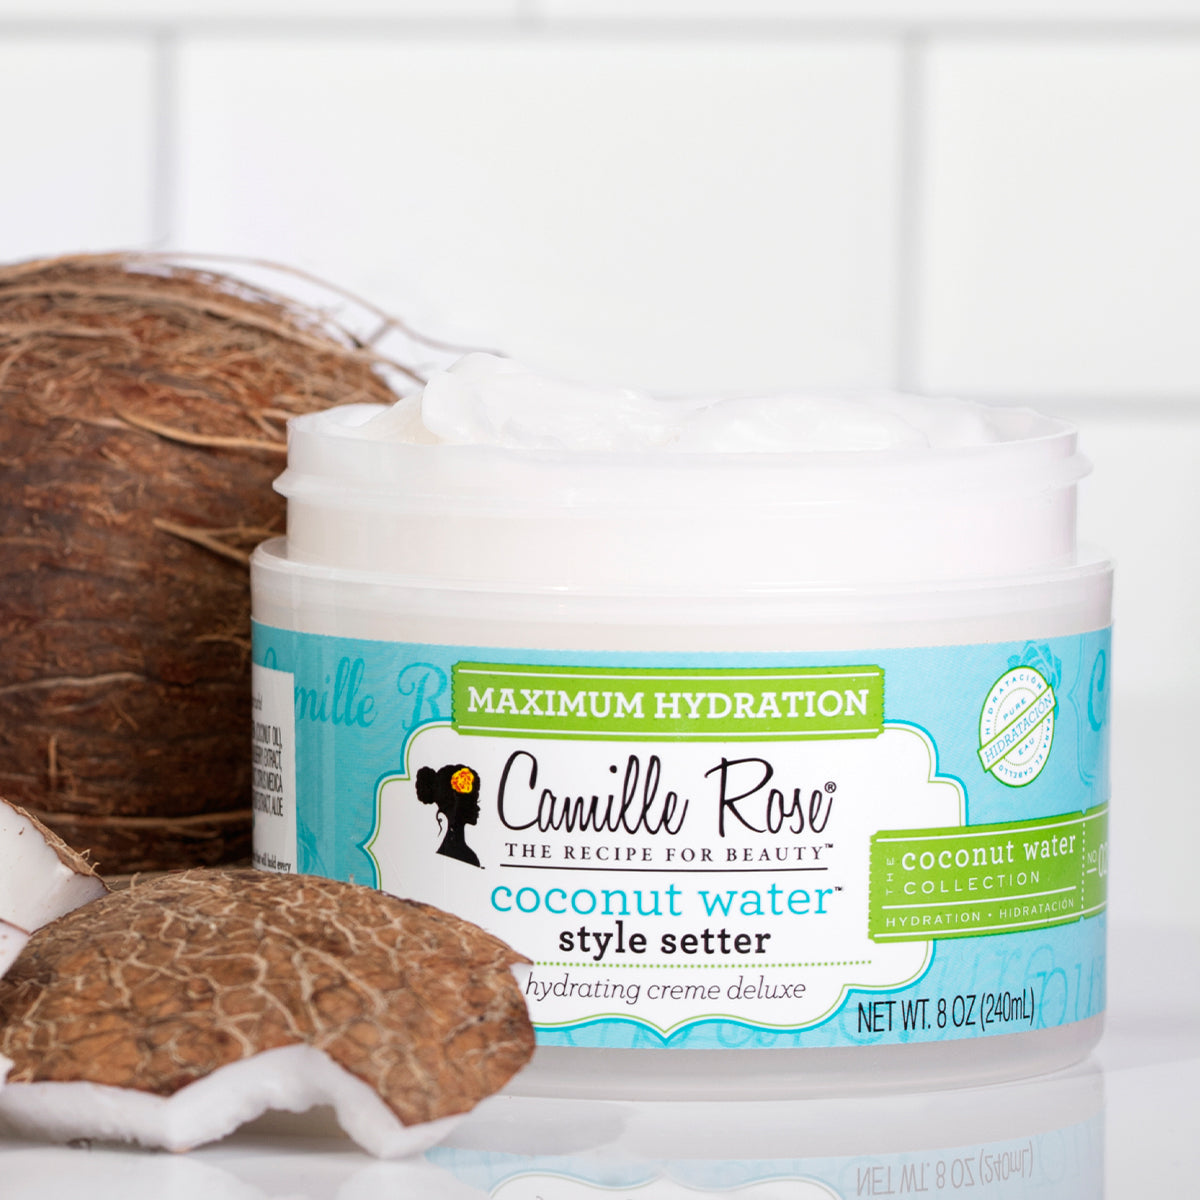 Camille Rose Coconut Water Style Setter Hydrating Creme Deluxe